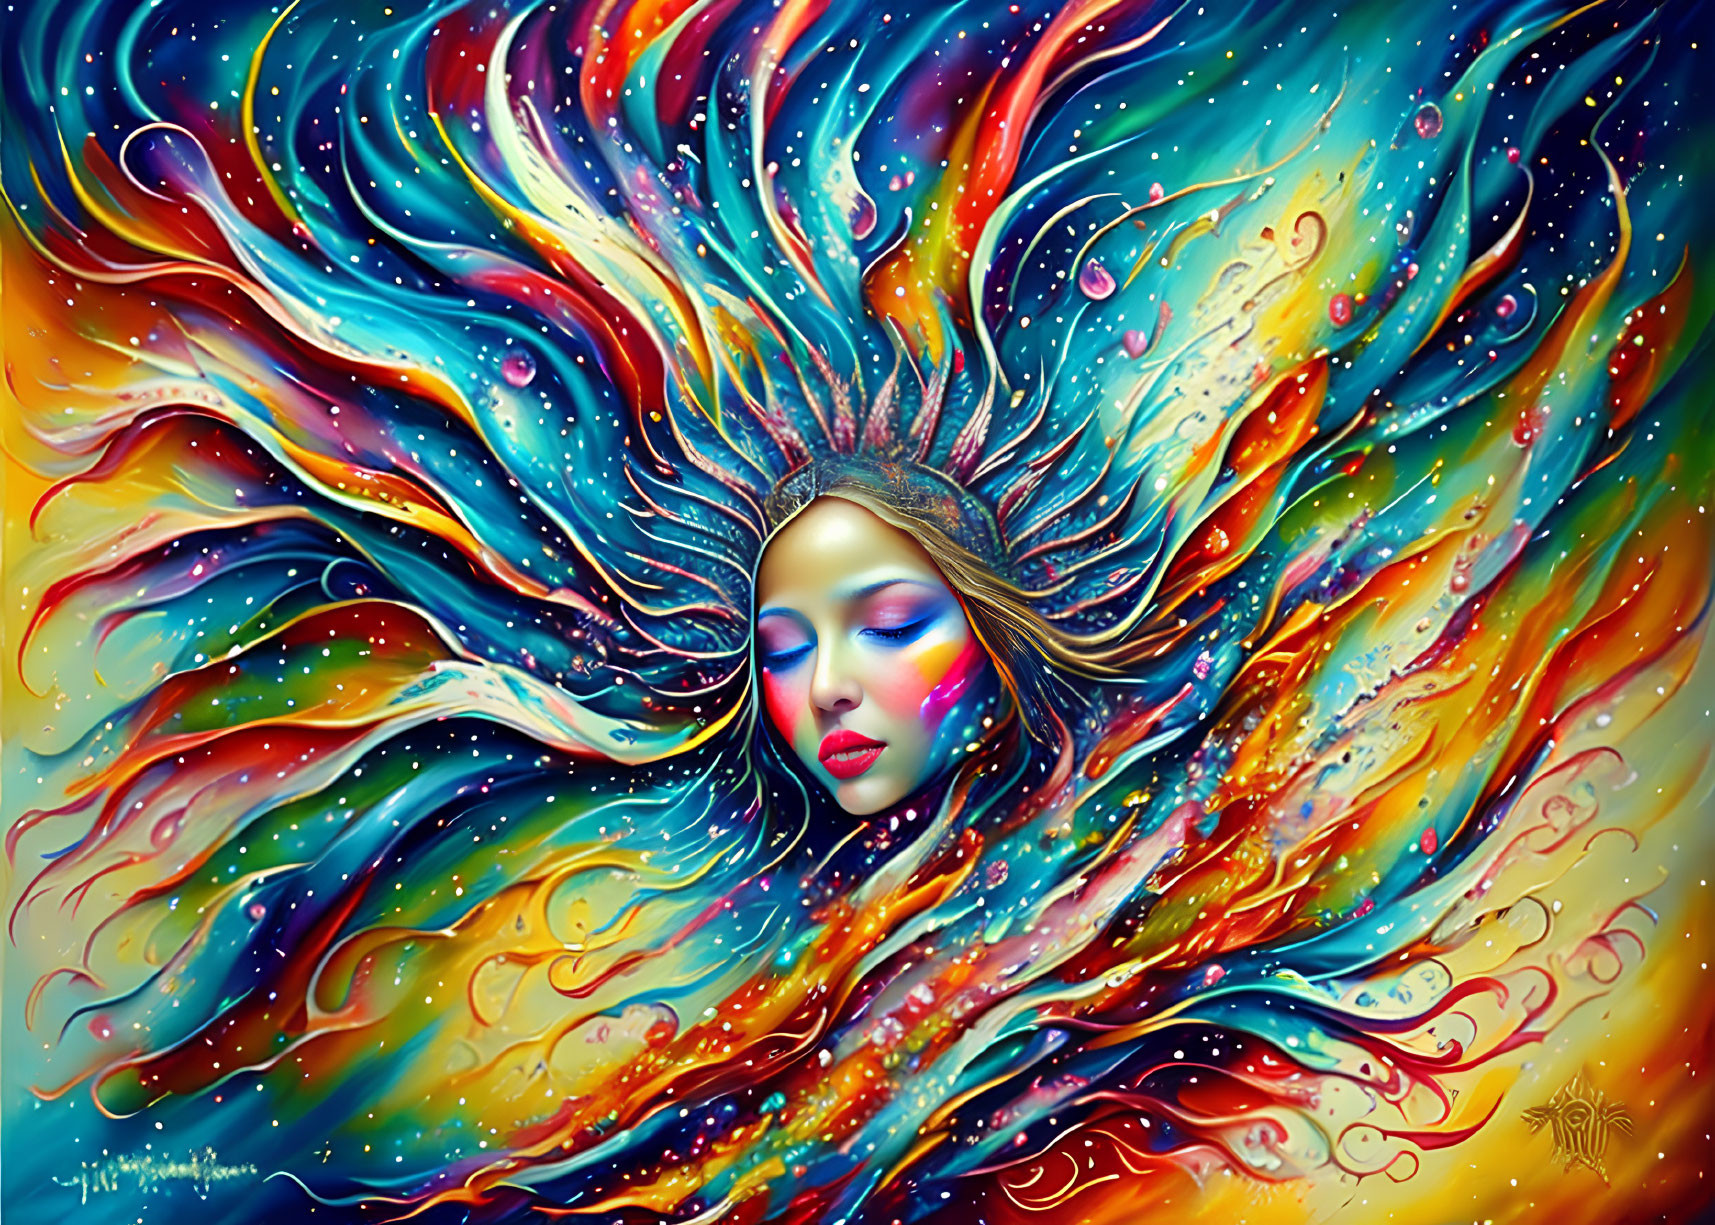 Colorful Artwork: Woman with Flowing Hair and Cosmic Patterns